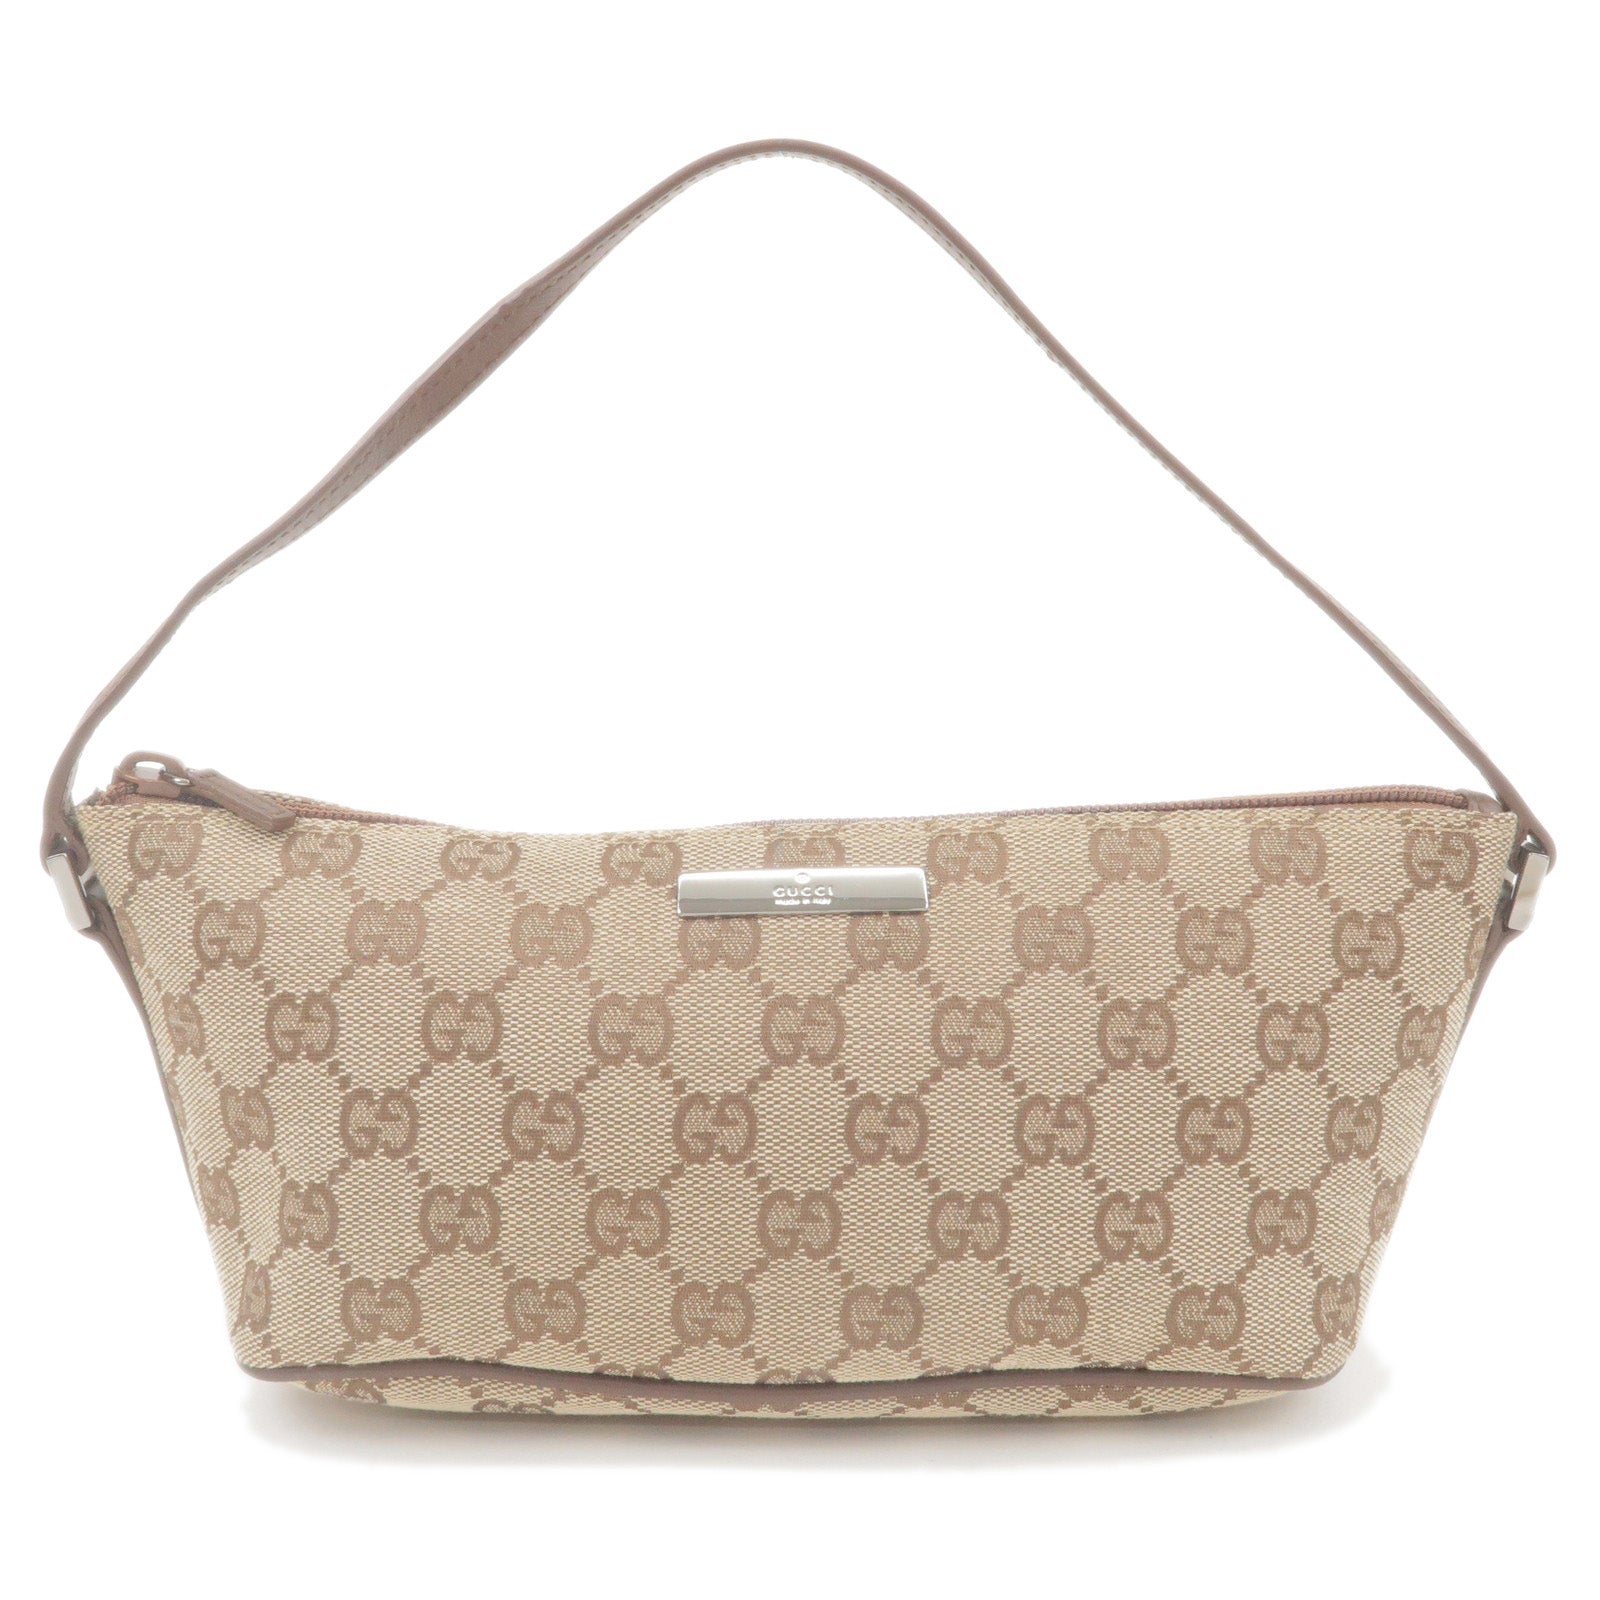 GUCCI-Boat-Bag-GG-Canvas-Leather-Hand-Bag-Beige-Brown-07198